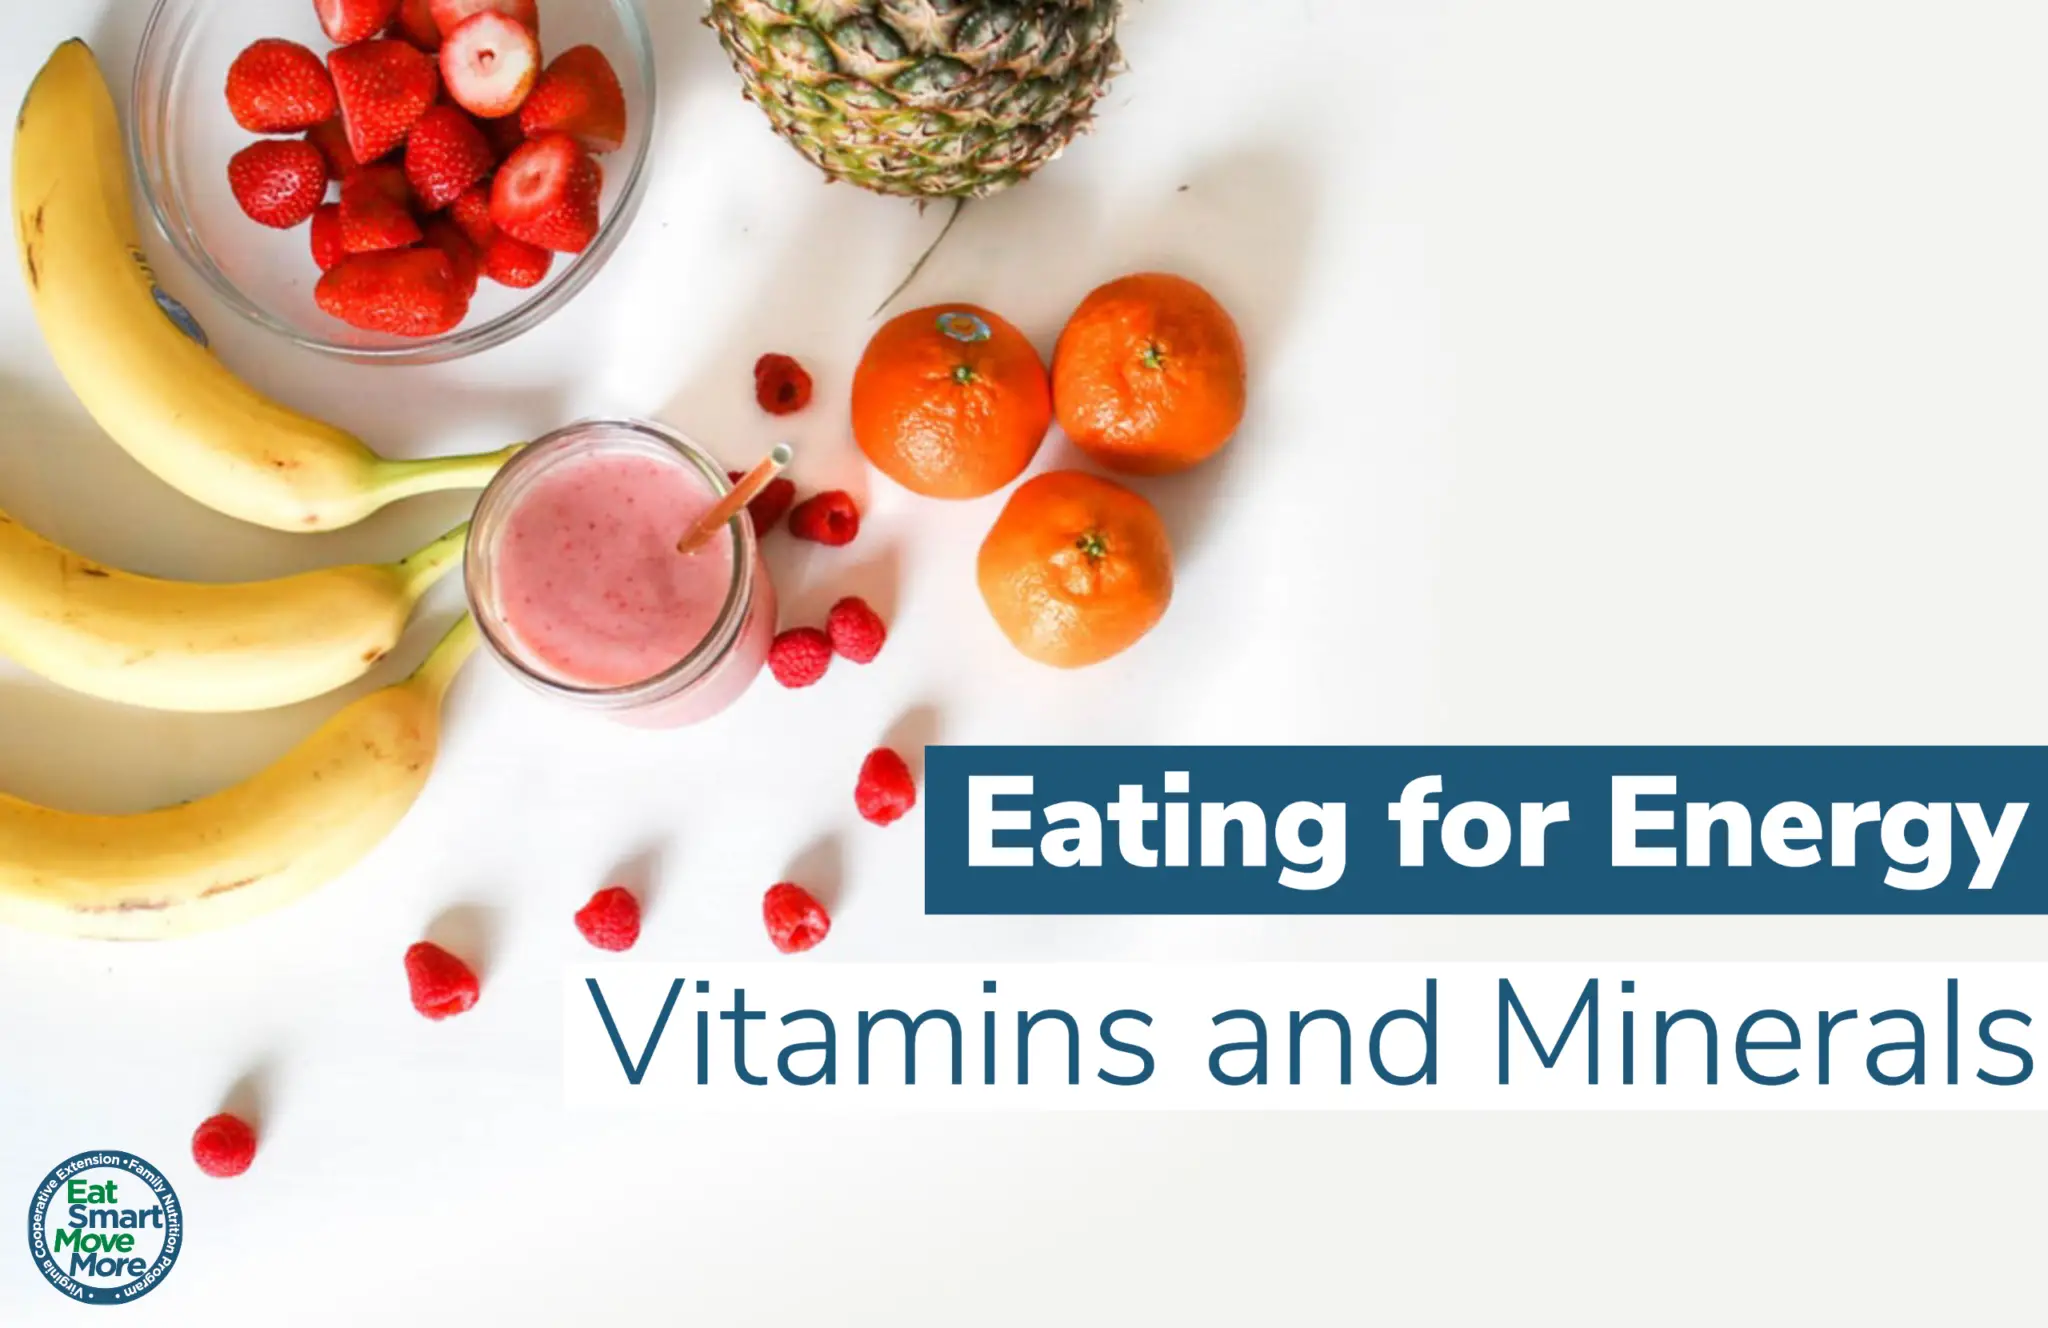 Eating for Energy: Vitamins and Minerals